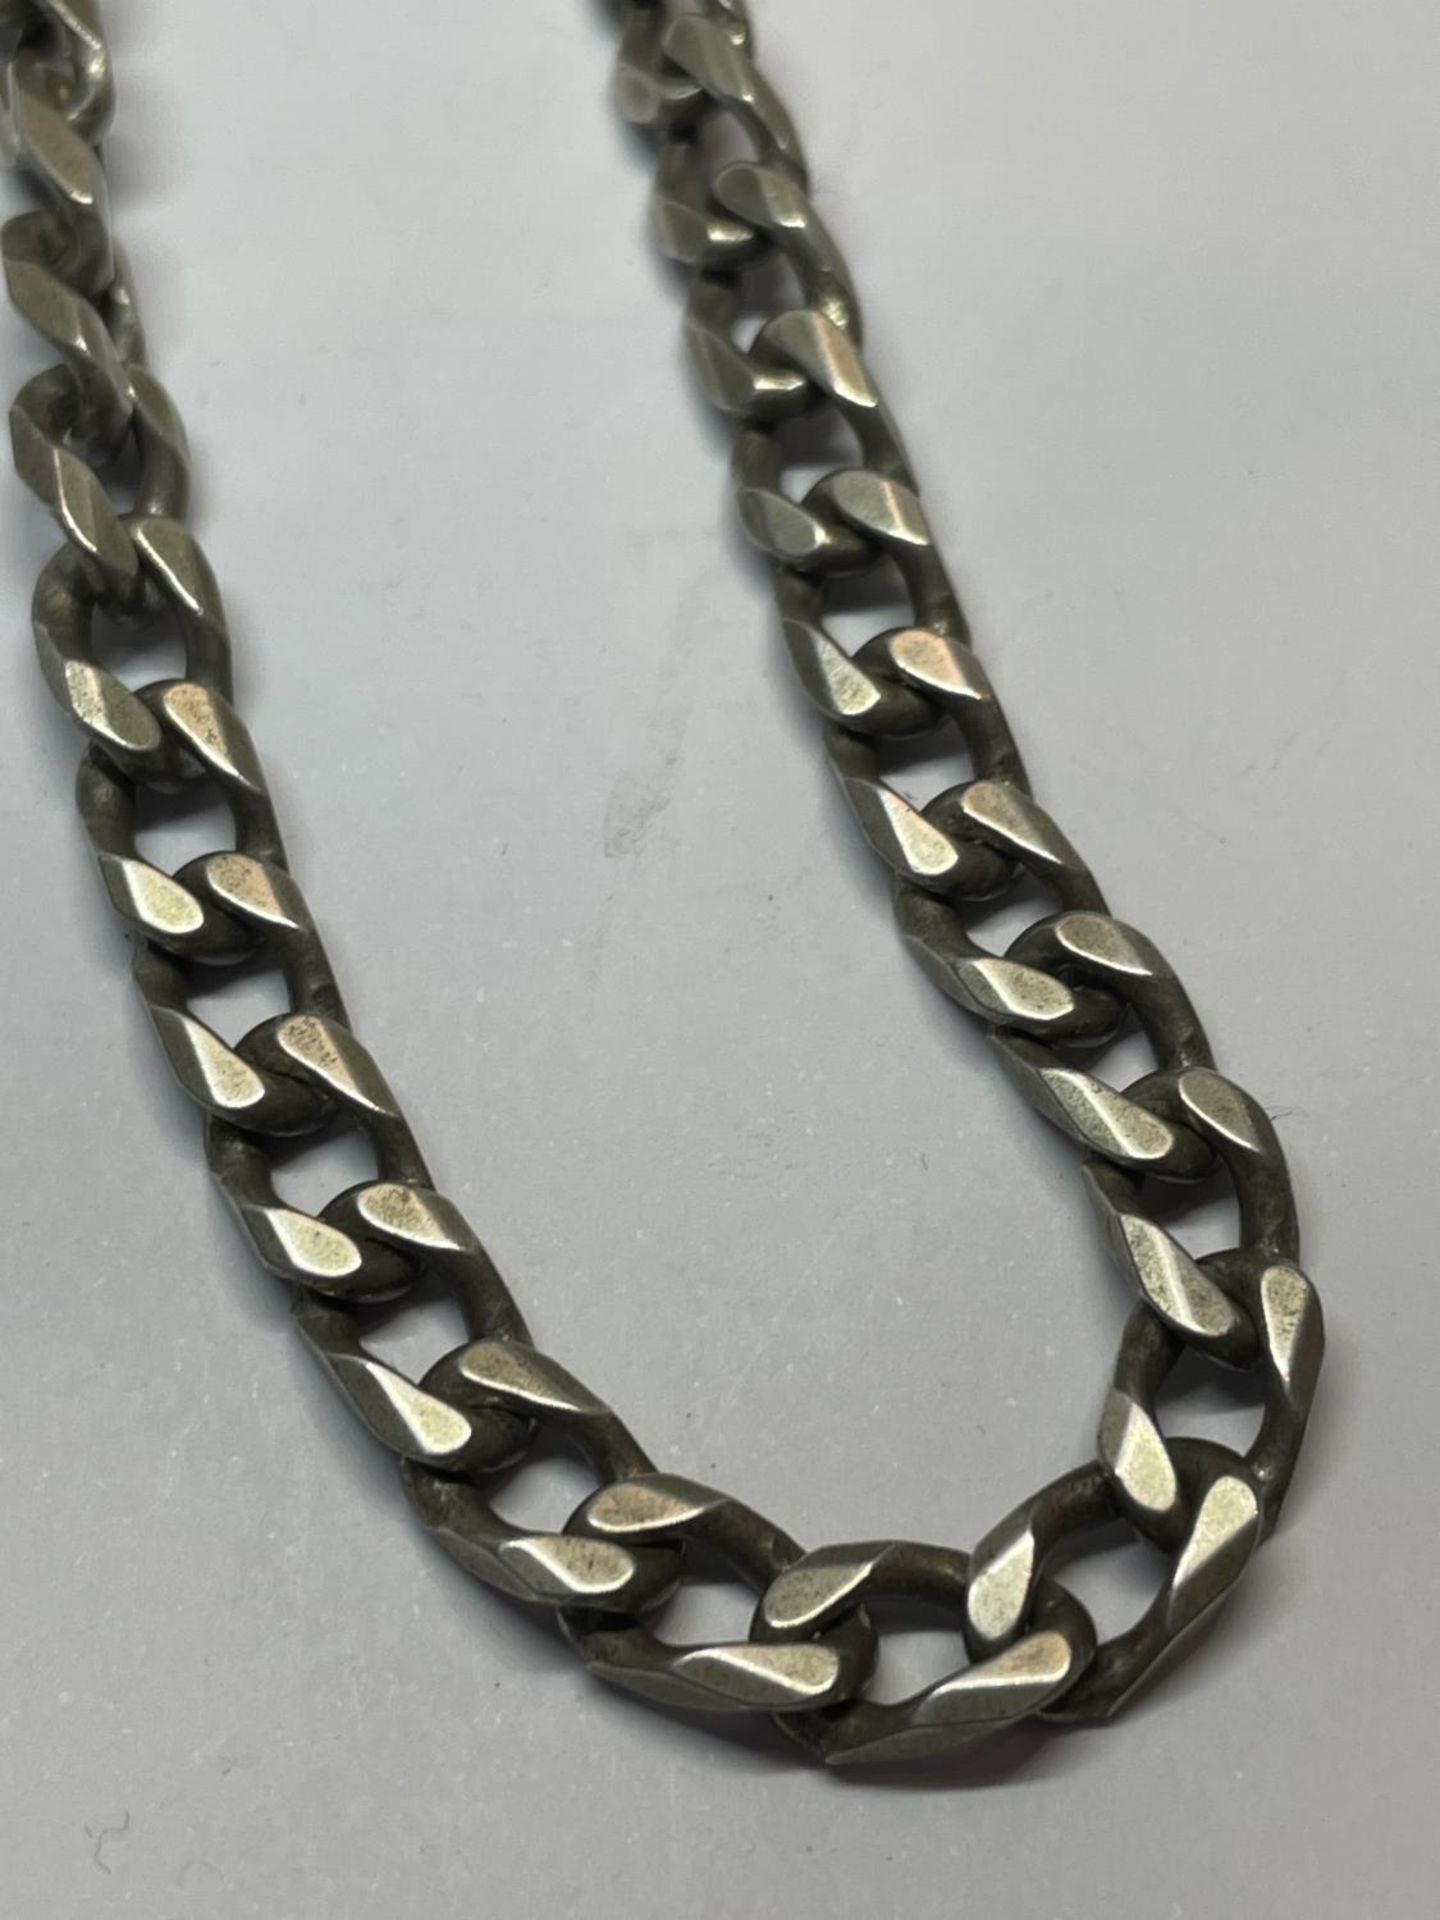 A HEAVY SILVER FLAT LINK NECKLACE LENGTH 20" - Image 2 of 3